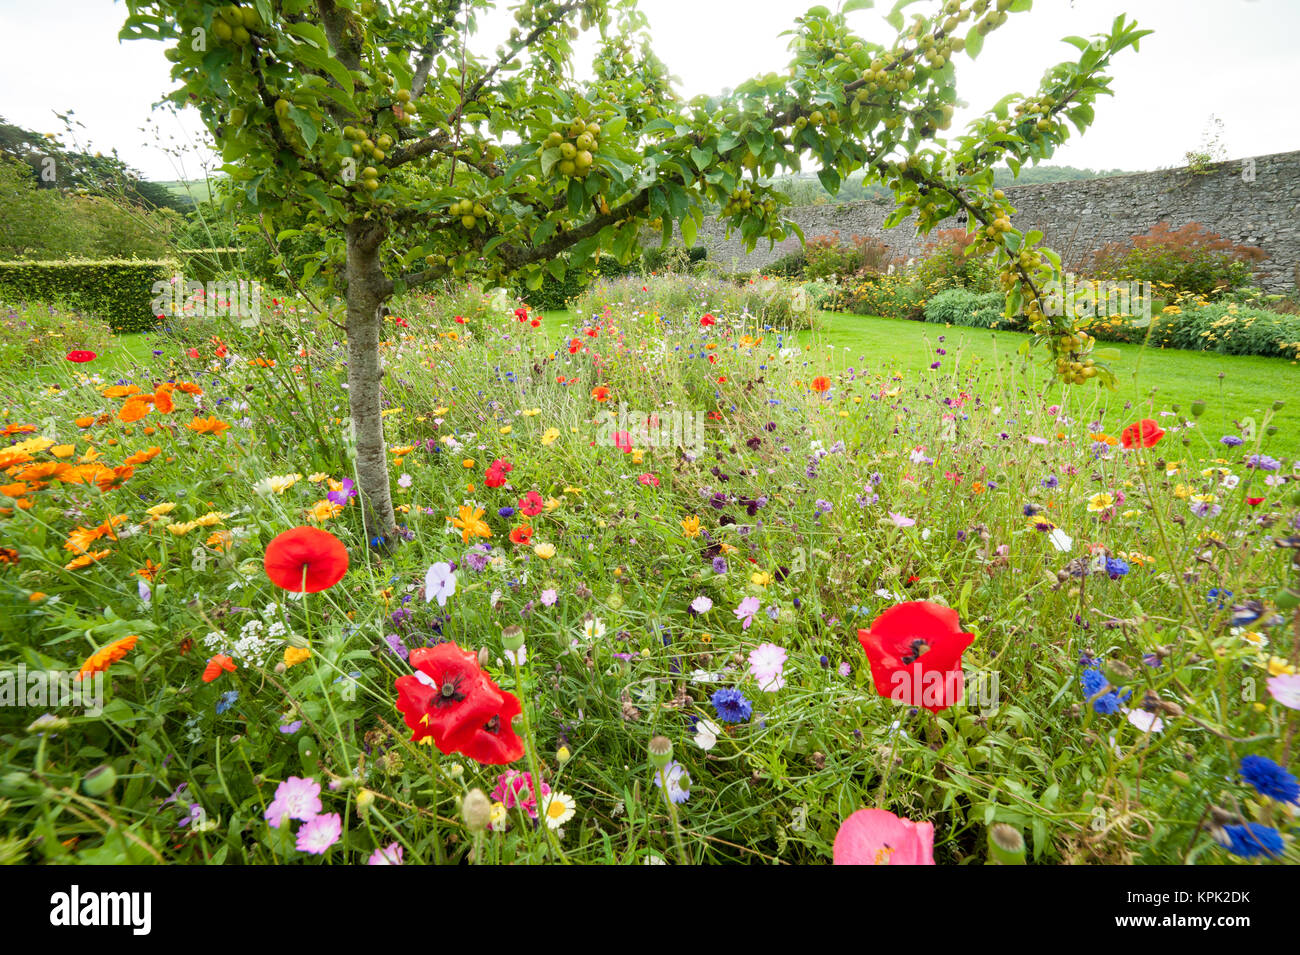 Small apple tree full of apples growing in a garden surrounded by many coulorful flowers such as poppies and daysies Stock Photo